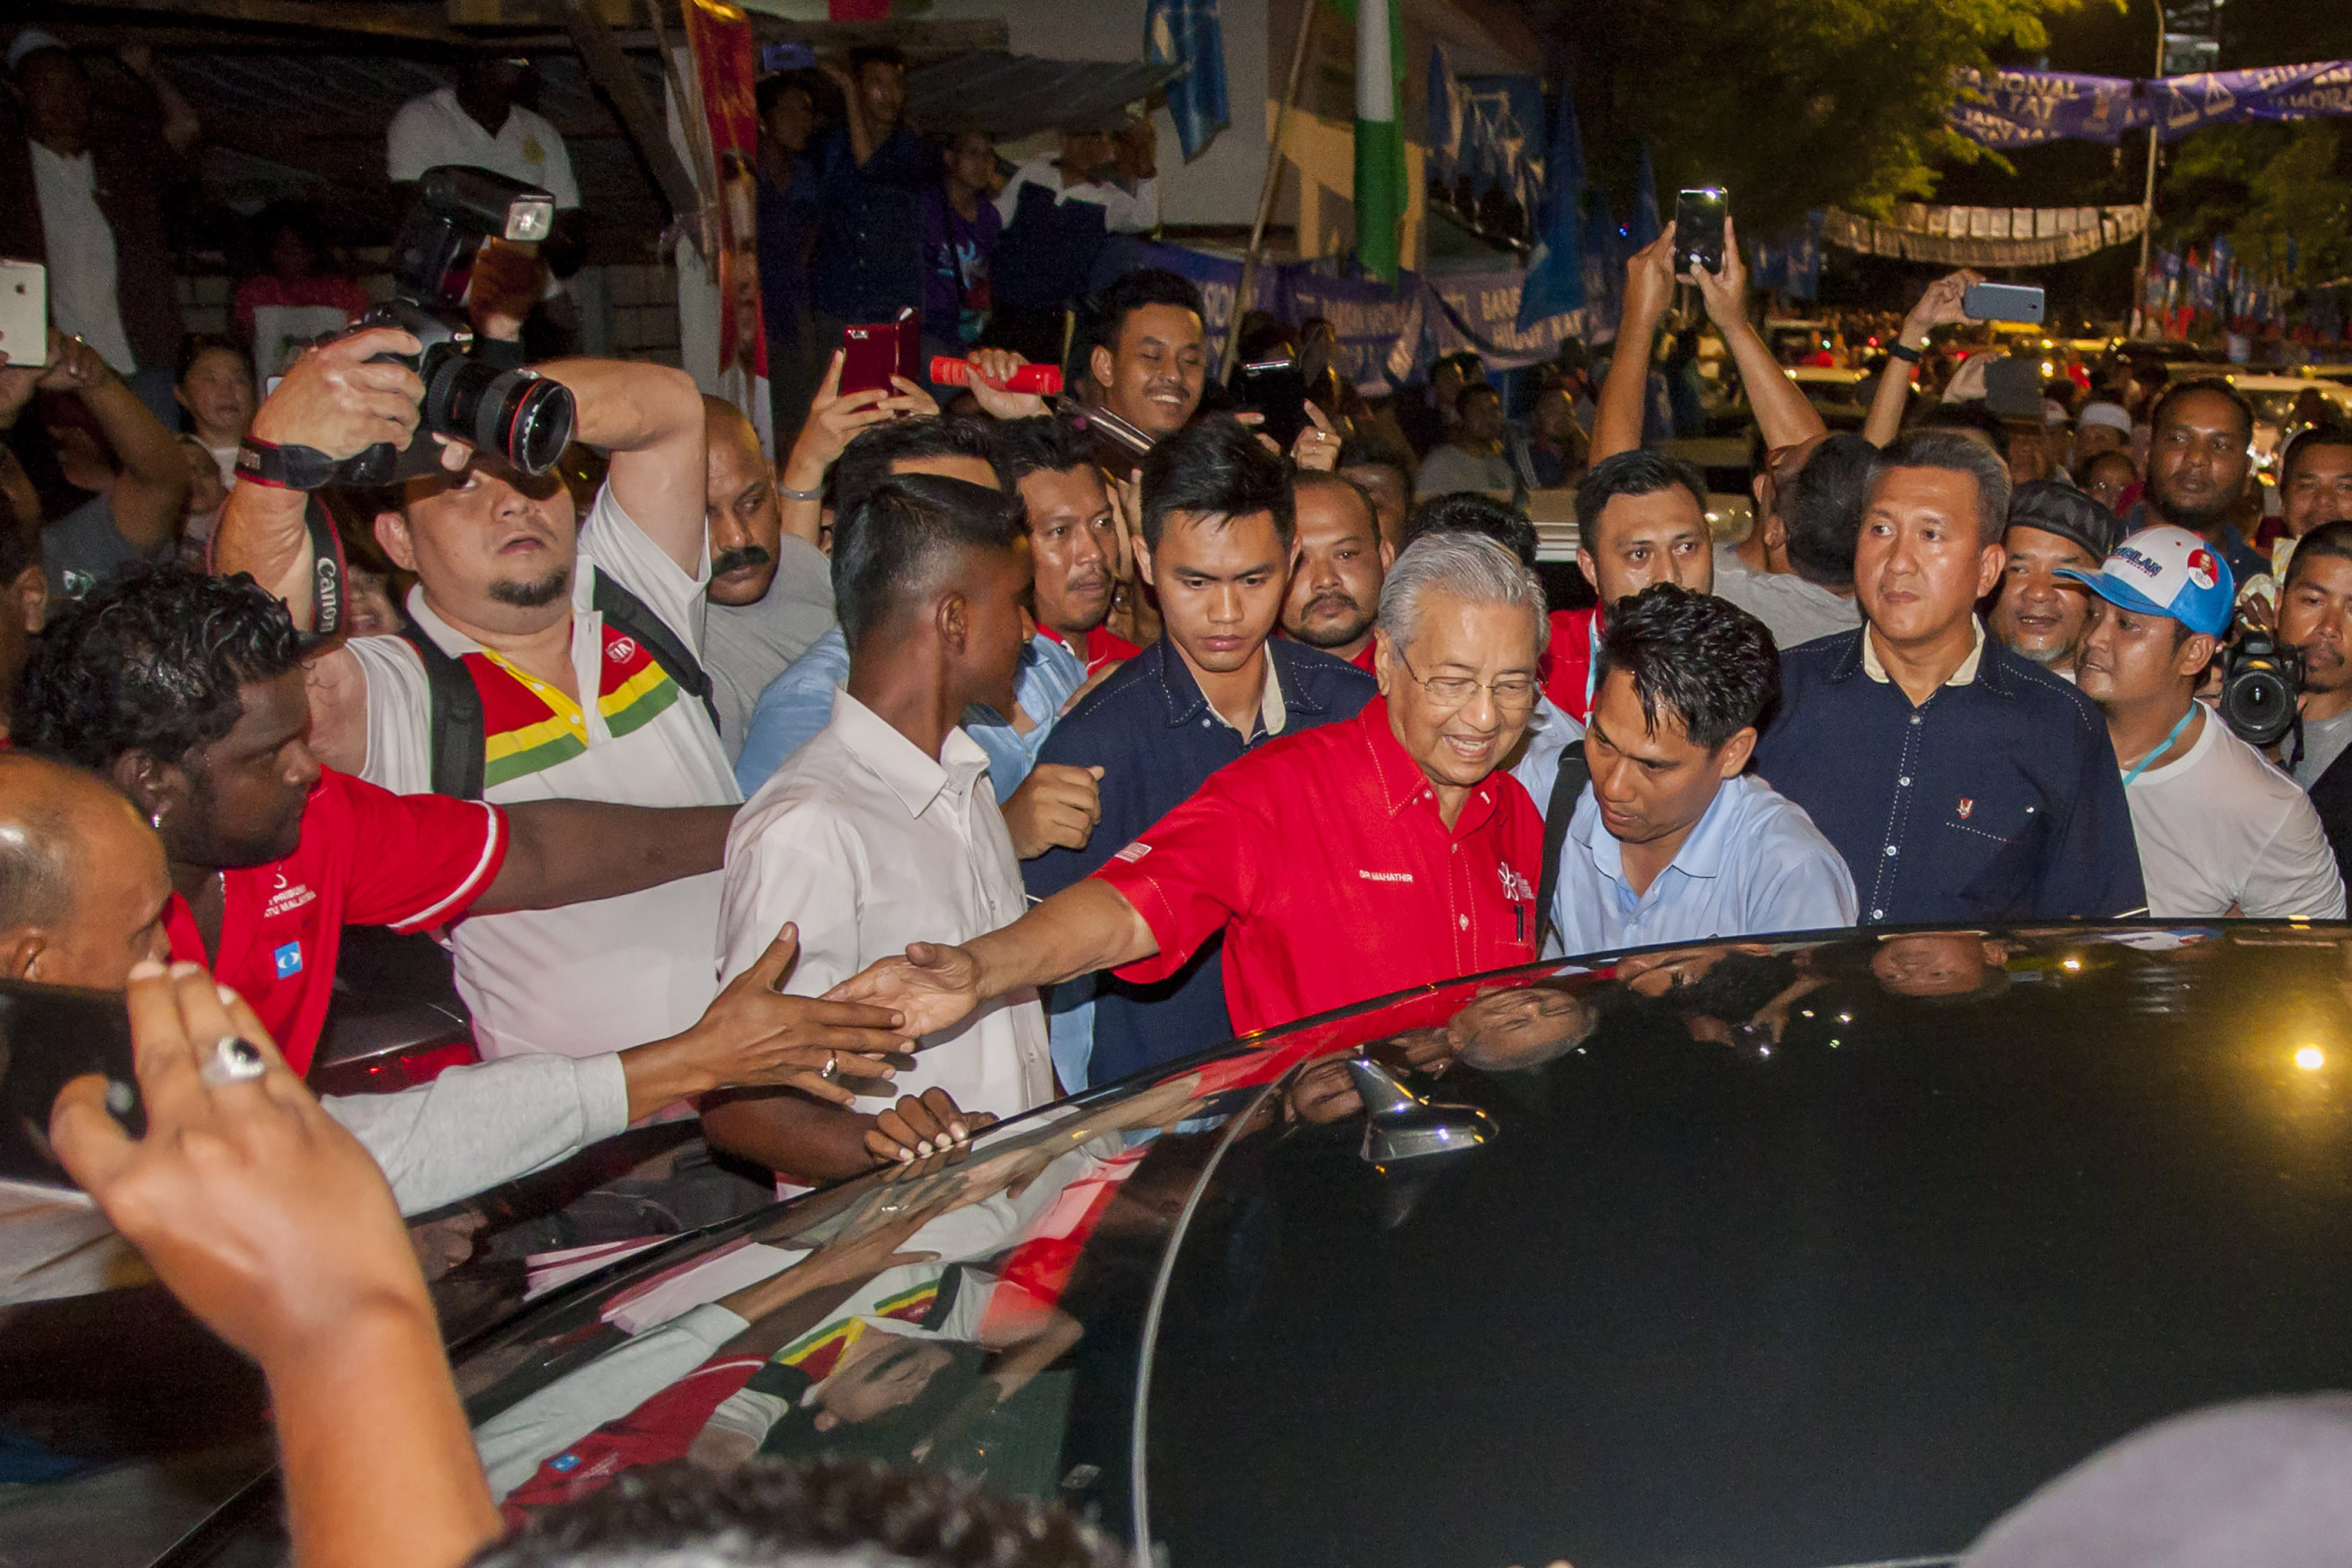 Dr Mahathir Mohamad the former Malaysian prime minister seen shaking hands with one supporter while leaving the Pakatan Harapan campaign rally at PPR Kerinchi, Kuala Lumpur. (SOPA Images/LightRocket/Getty Images)